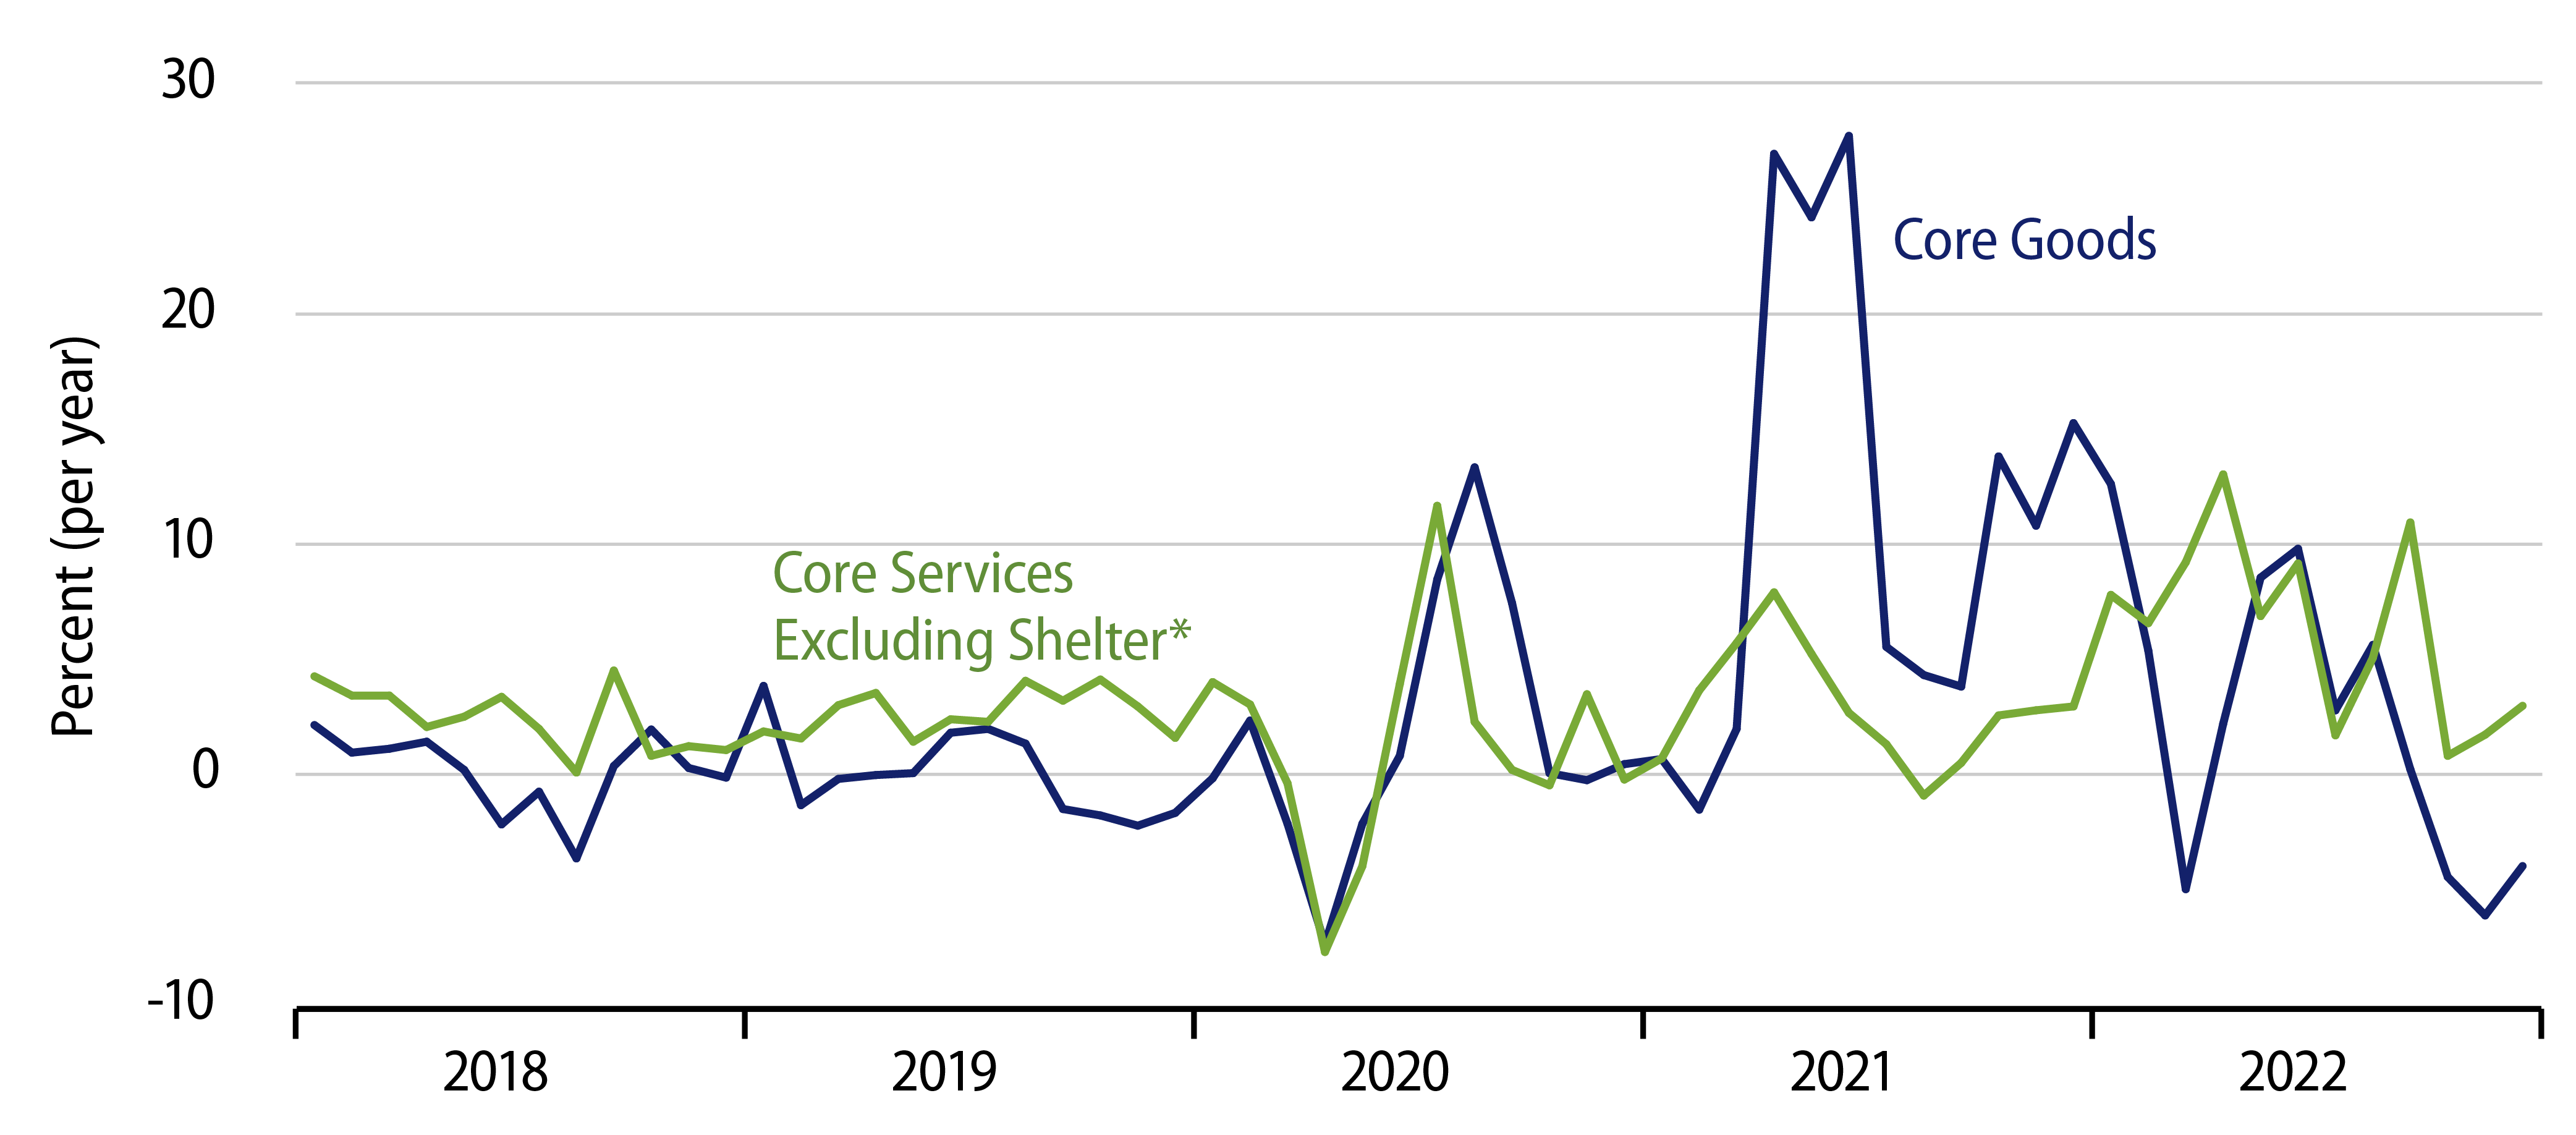 Explore Components of Core CPI Inflation, Excluding Shelter